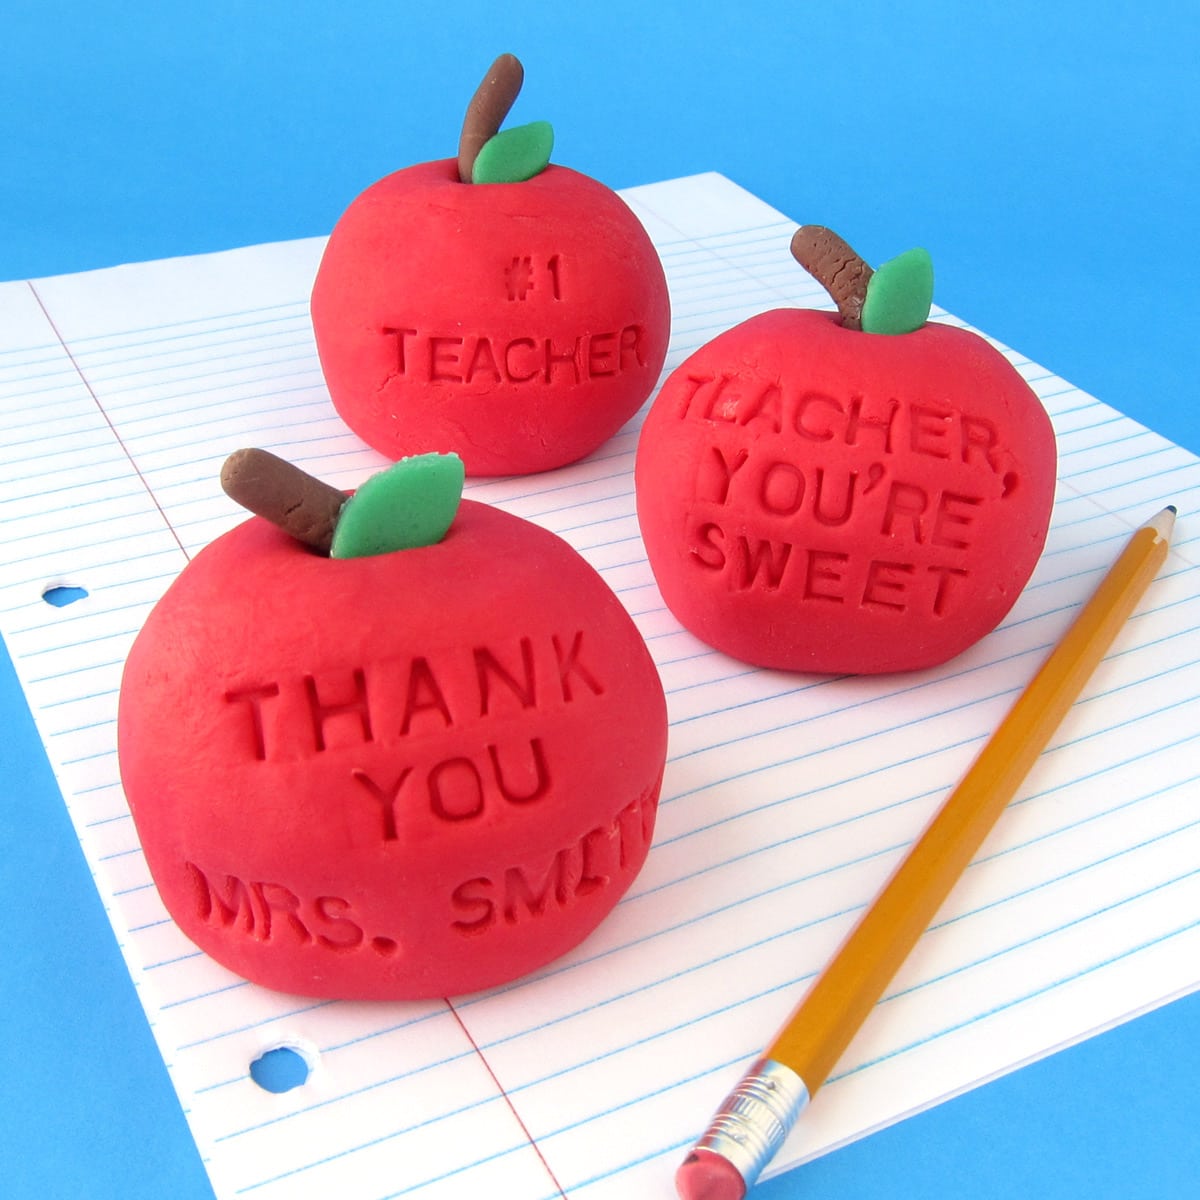 vanilla fudge apples stamped with special messages for teachers' gifts. 